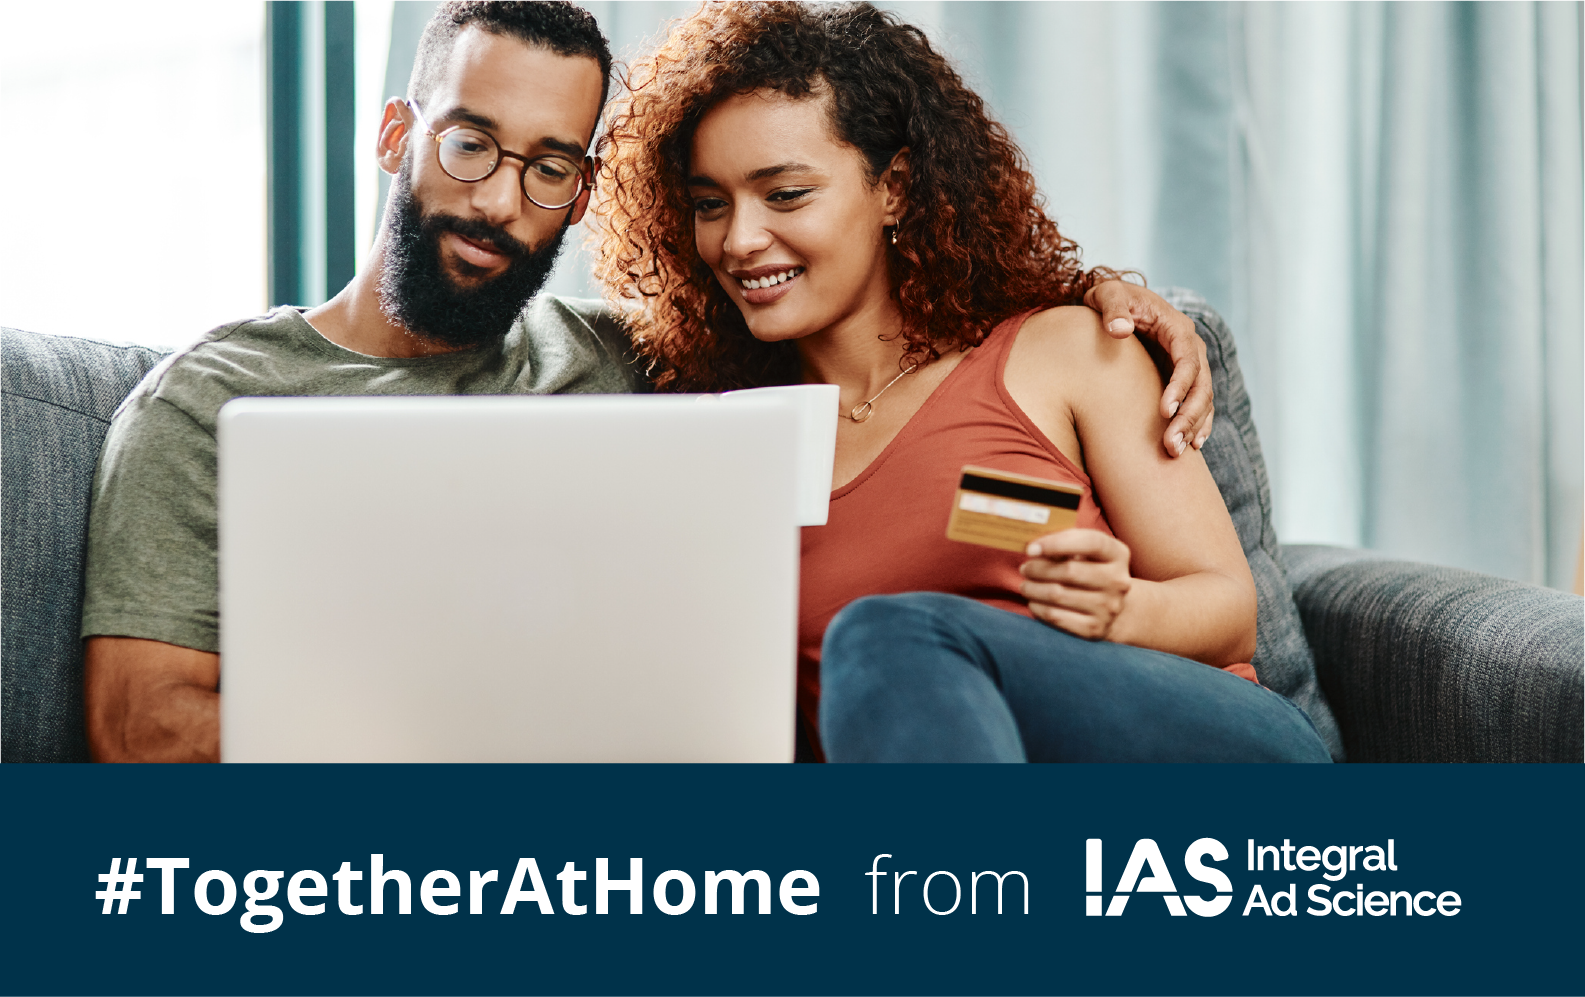 Together at Home: Investing in consumer connection